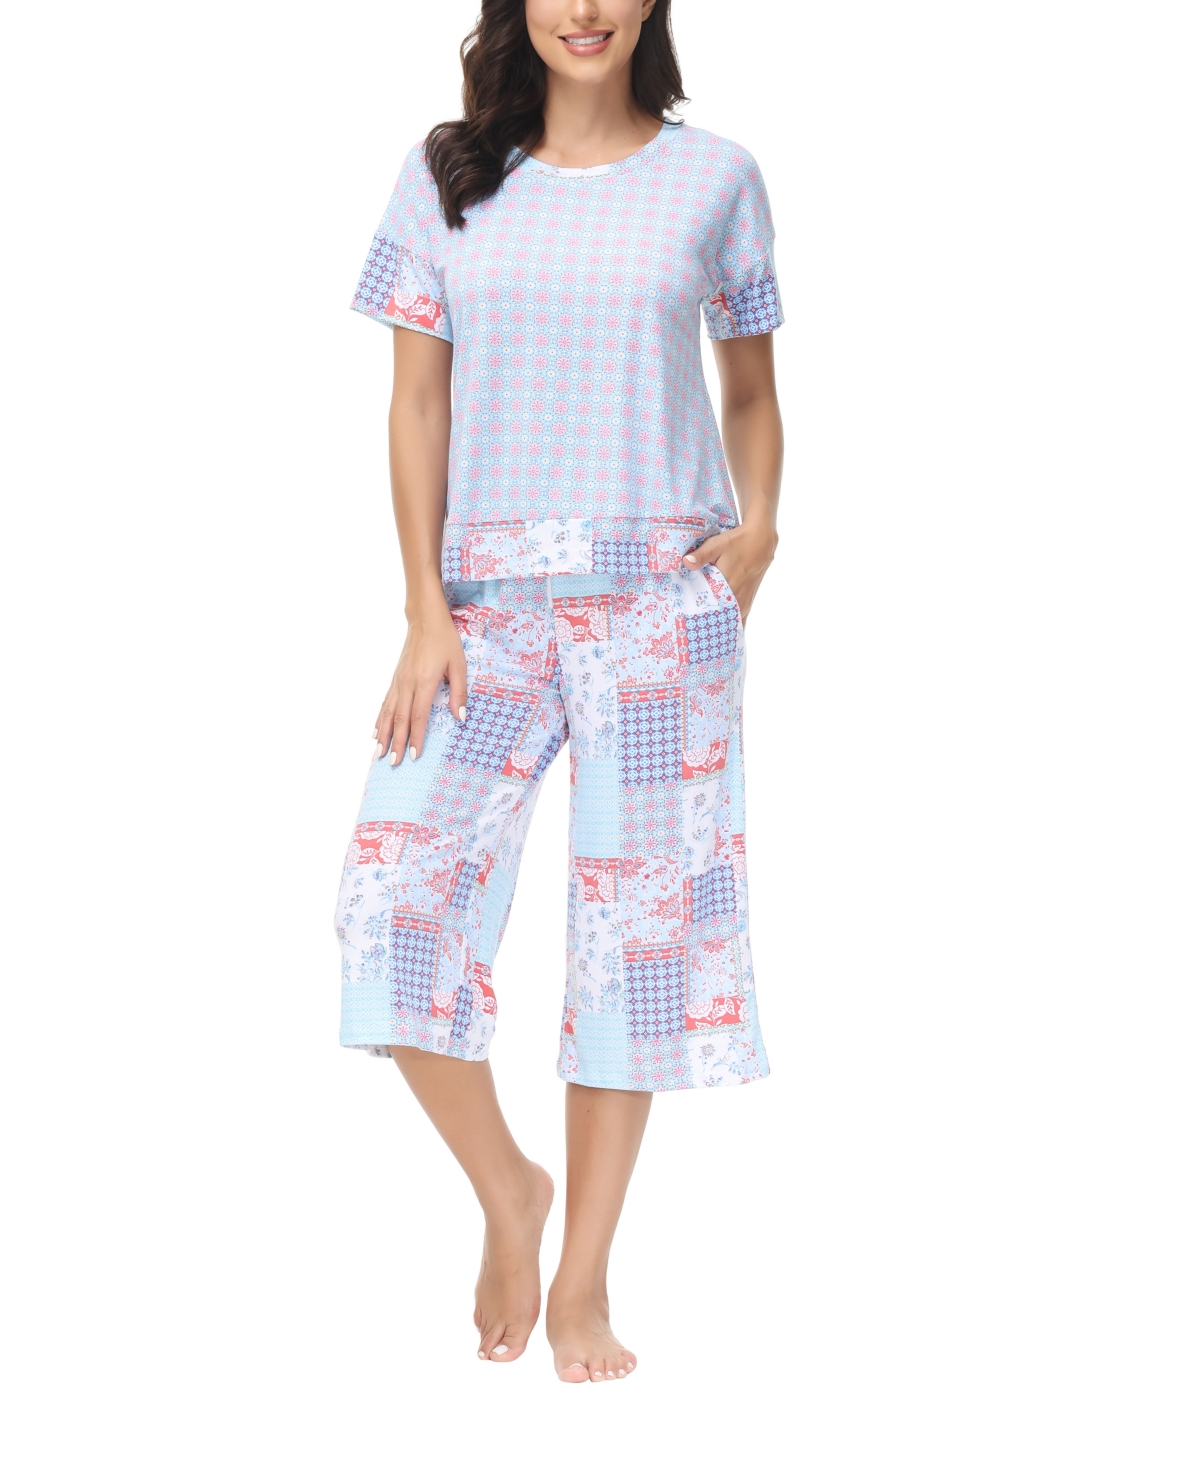 Ink+Ivy Women's Solid Short Sleeve T-shirt with Printed Capri 2 Piece Pajama Set